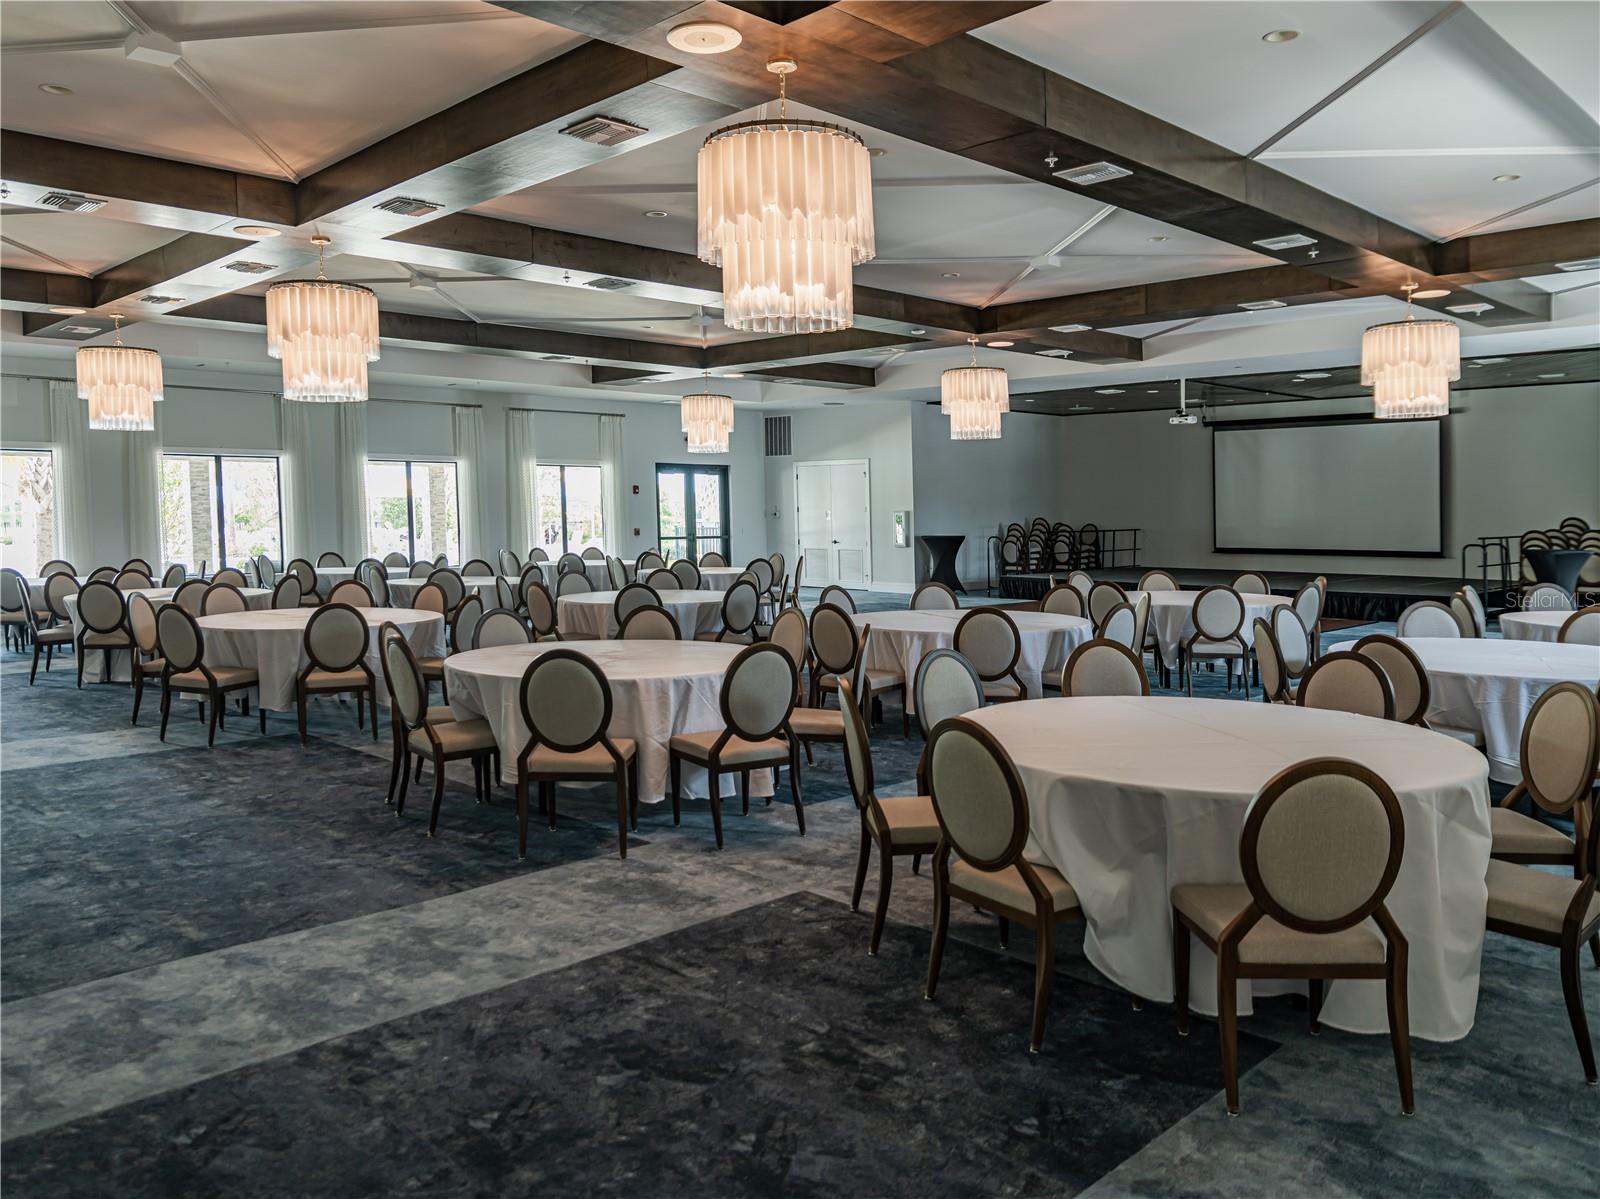 Huge Ball Room for Special Gatherings